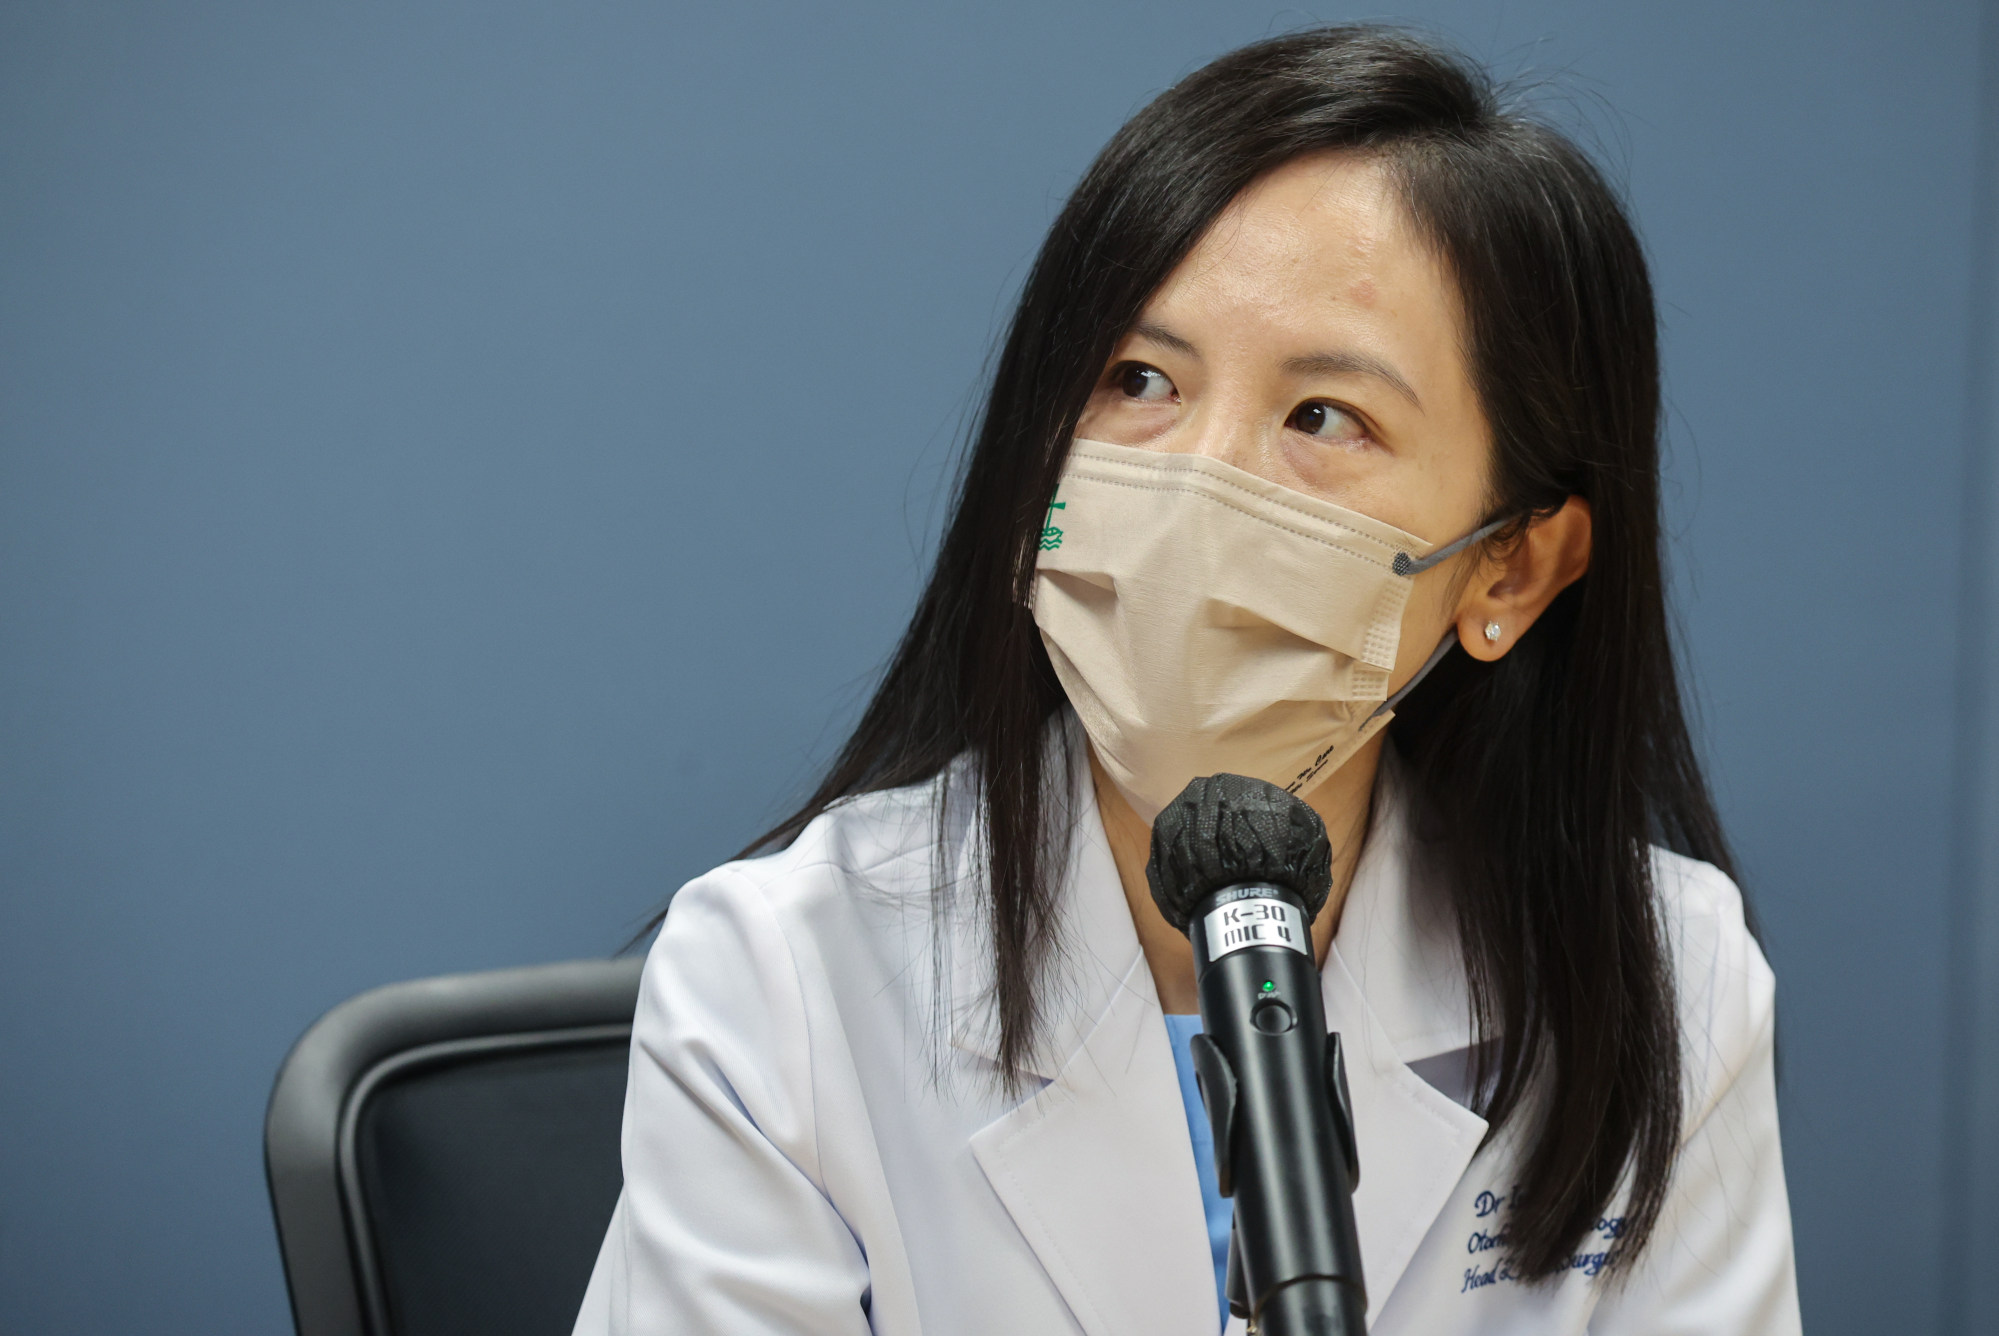 Dr Iris Leung speaks to the media about voice care. Photo: Edmond So